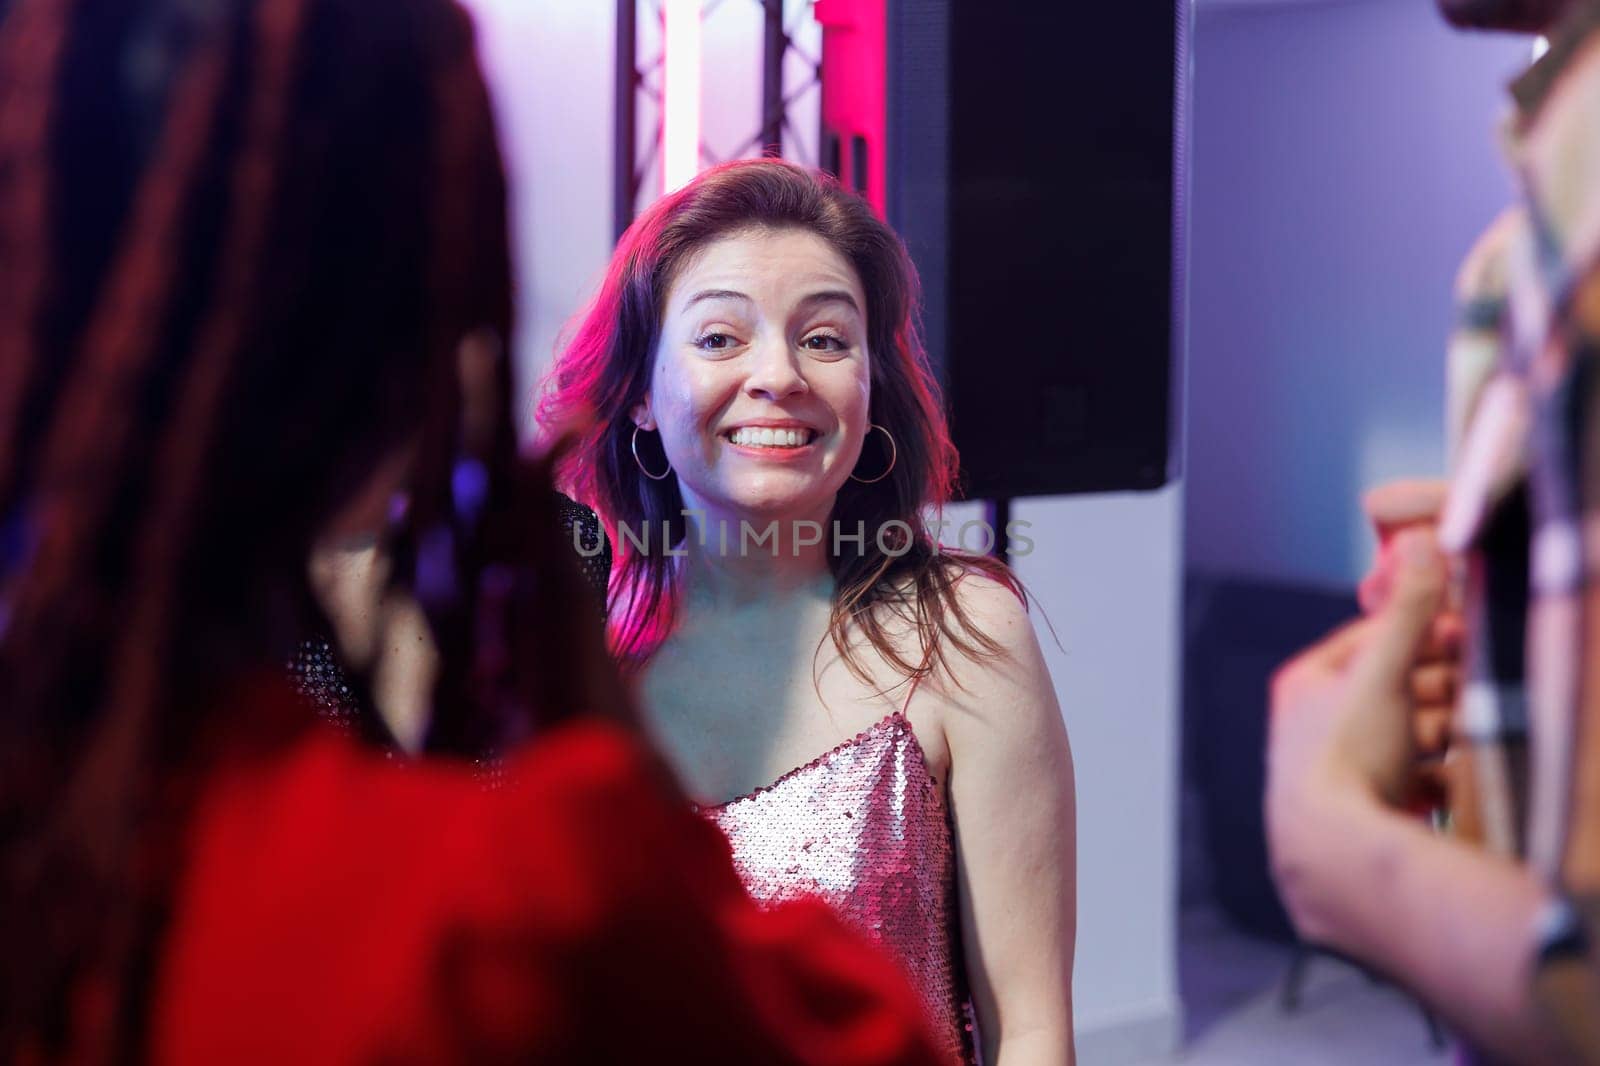 Smiling cheerful woman partying with friends and socializing at nightclub discotheque. Carefree happy girl clubbing and attending disco social gathering event, enjoying nightlife leisure